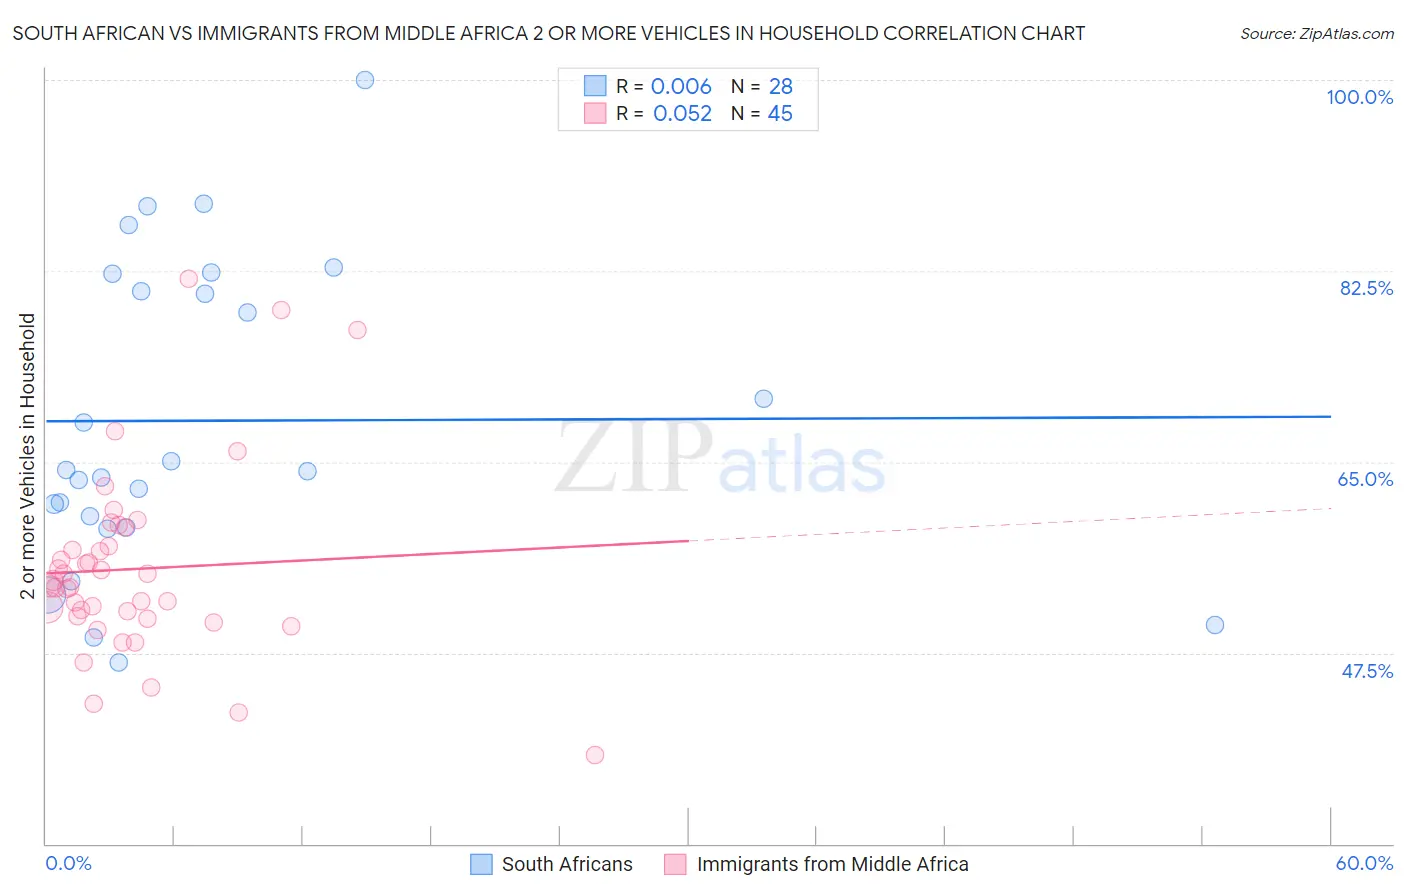 South African vs Immigrants from Middle Africa 2 or more Vehicles in Household